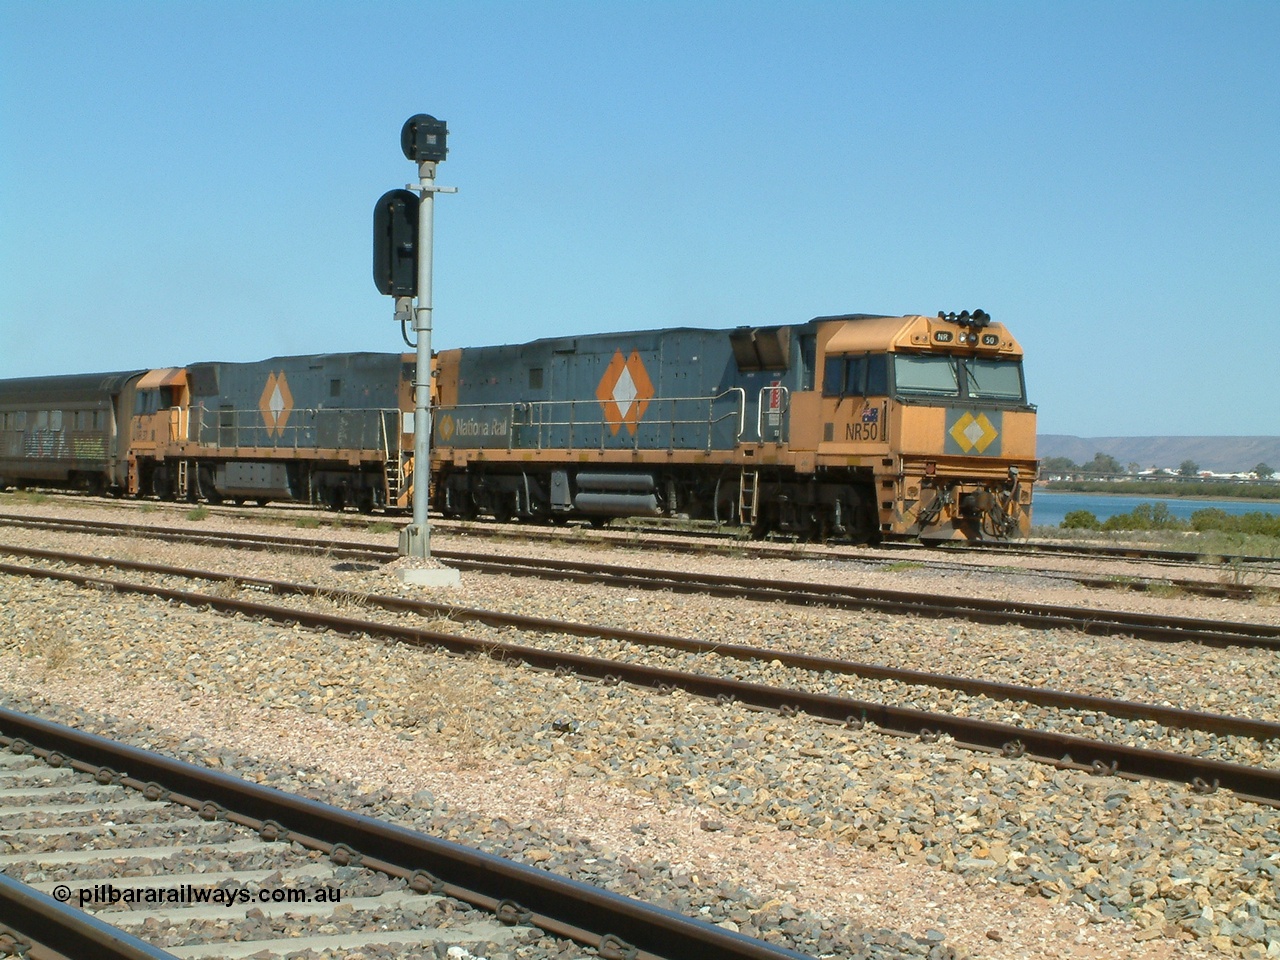 030404 125101
Port Augusta Spencer Junction yard, a Perth bound intermodal awaits departure time on 13 Road behind National Rail NR class units built by Goninan as GE Cv40-9i models, NR 50 serial 7250-08 / 97-252 and NR 37 serial 7250-06 / 97-239. 4th April 2003.
Keywords: NR-class;NR50;Goninan;GE;Cv40-9i;7250-08/97-252;